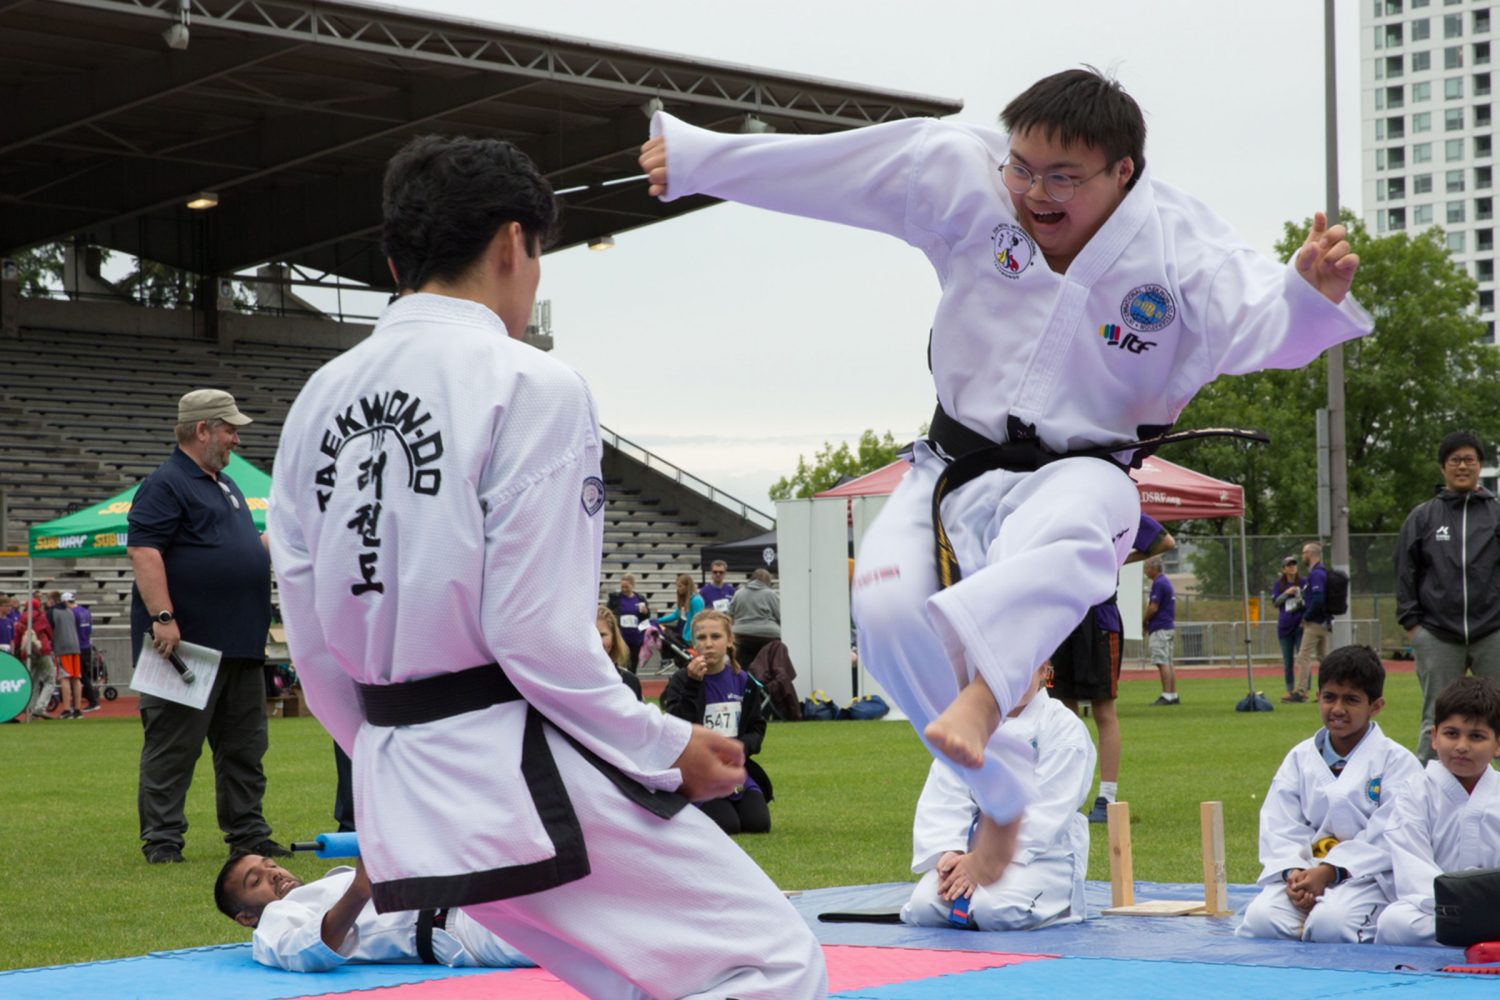 Young man with Down syndrome delivers flying kick in taekwondo demonstration